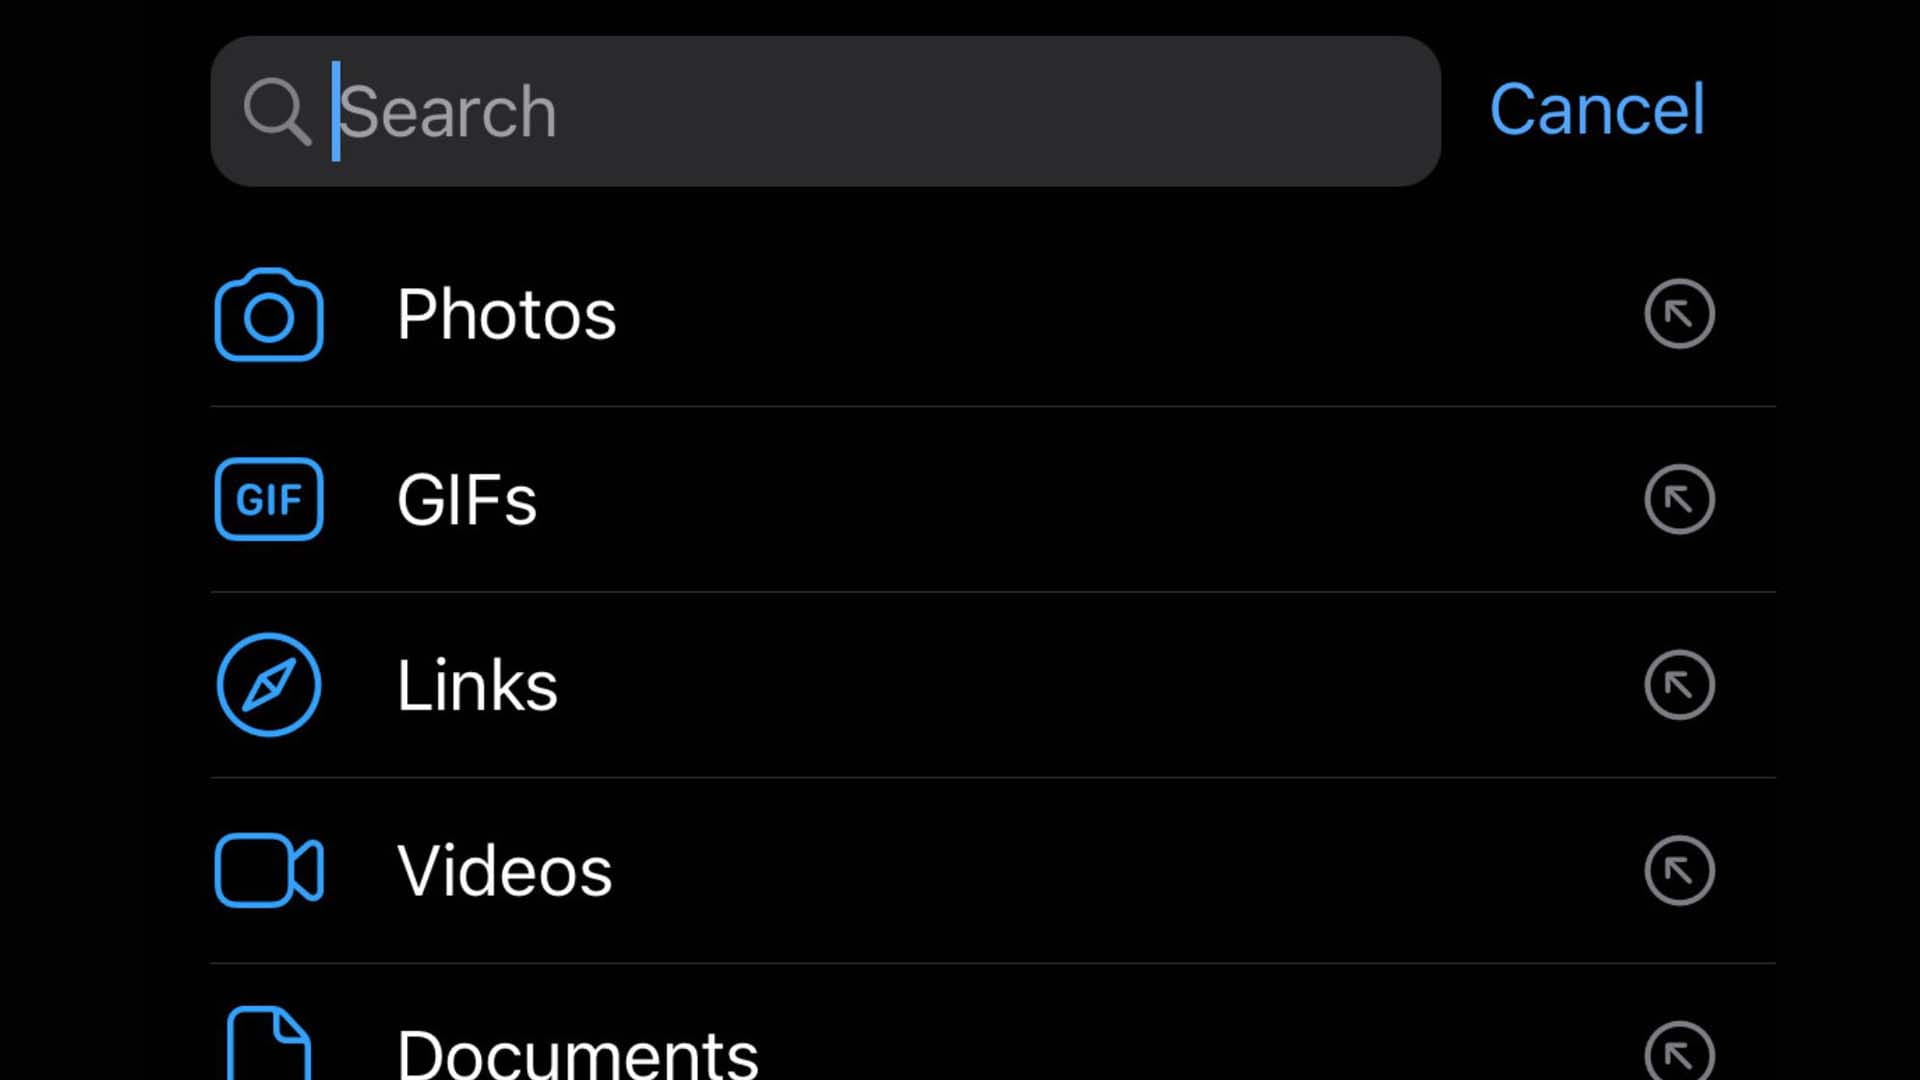 A screenshot to show the search function in Whatsapp